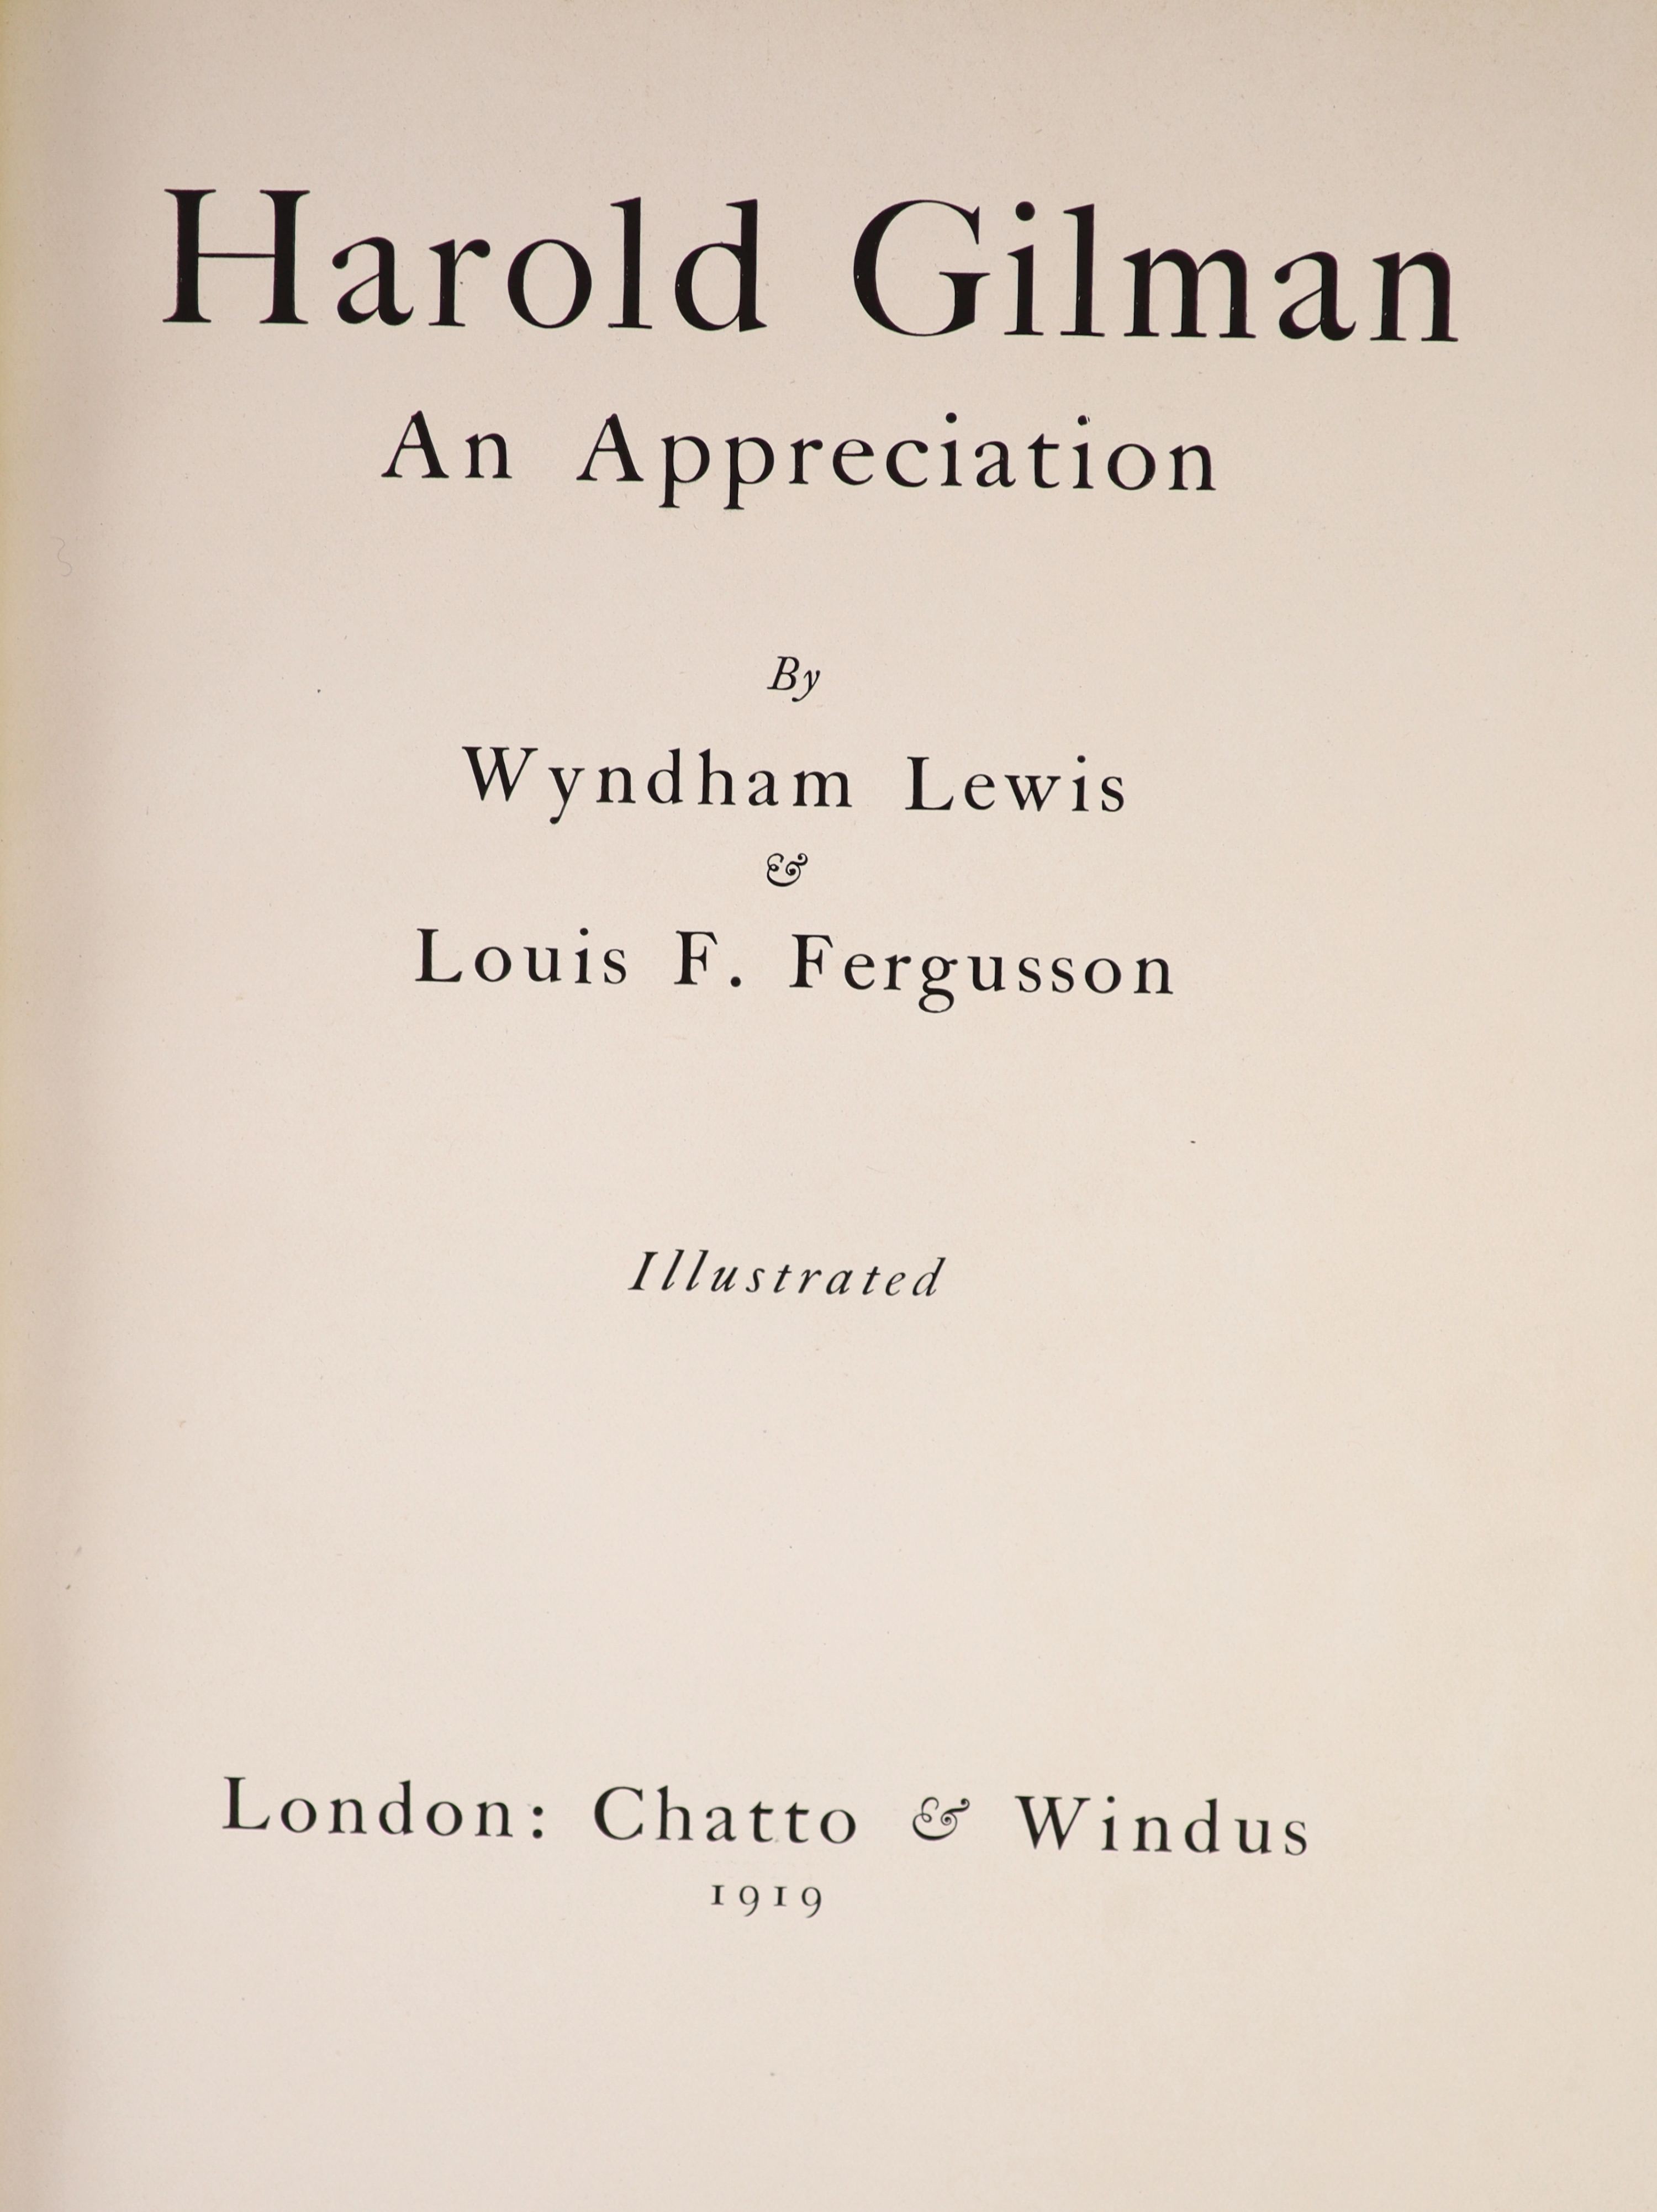 Lewis, Wyndham and Furgusson, Louis F - Harold Gilman - An Appreciation, 4to, original cloth, tissue guarded colour frontis and thirty-two black and white plates, Chatto and Windus, London, 1919